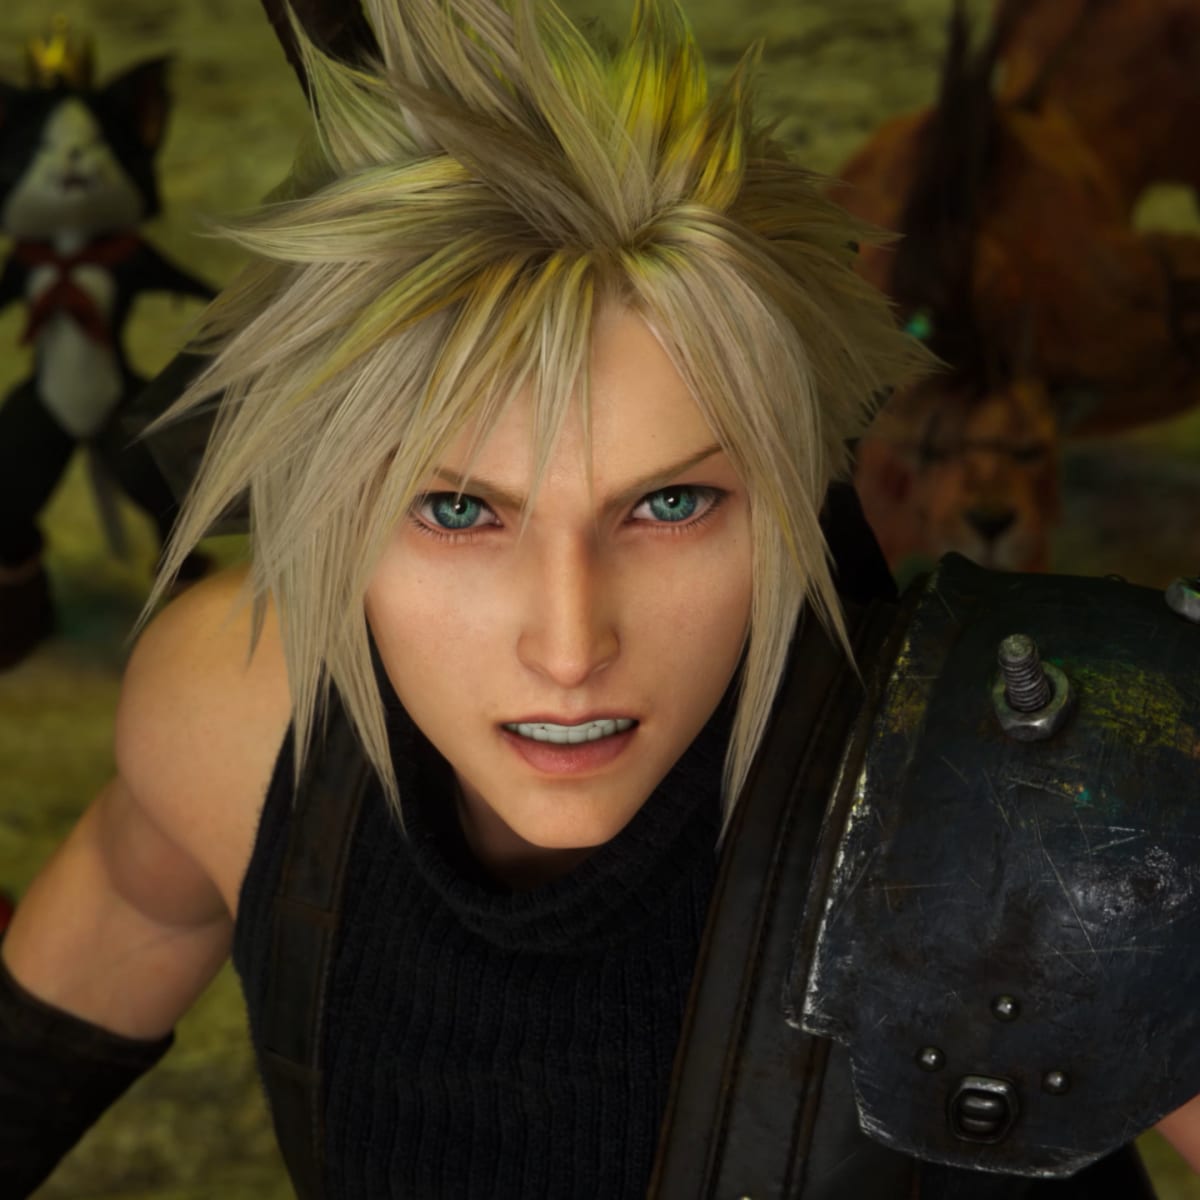 Final Fantasy 7 Rebirth disk blunder set to cause mass confusion on launch  day - Dexerto